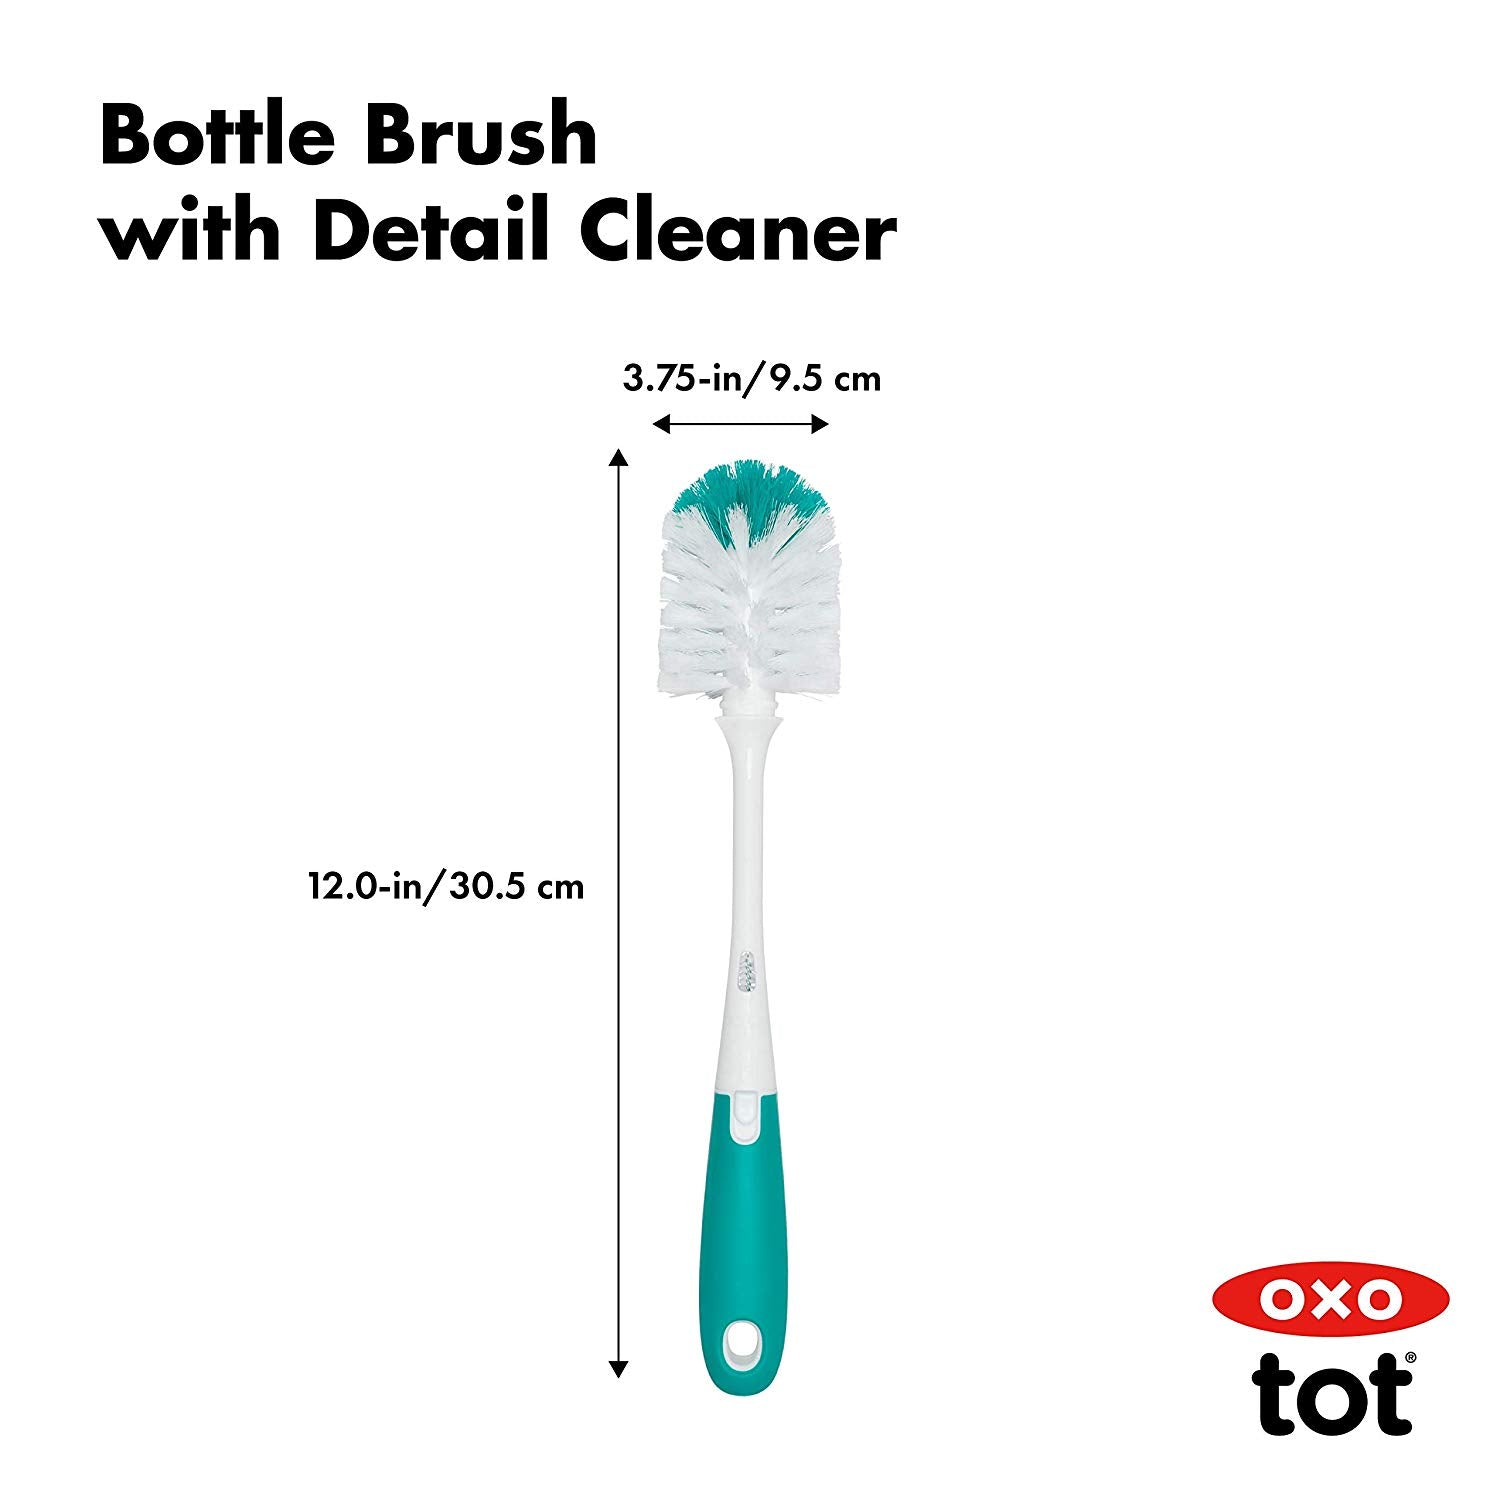 OXO Tot Bottle Brush with Stand, Teal